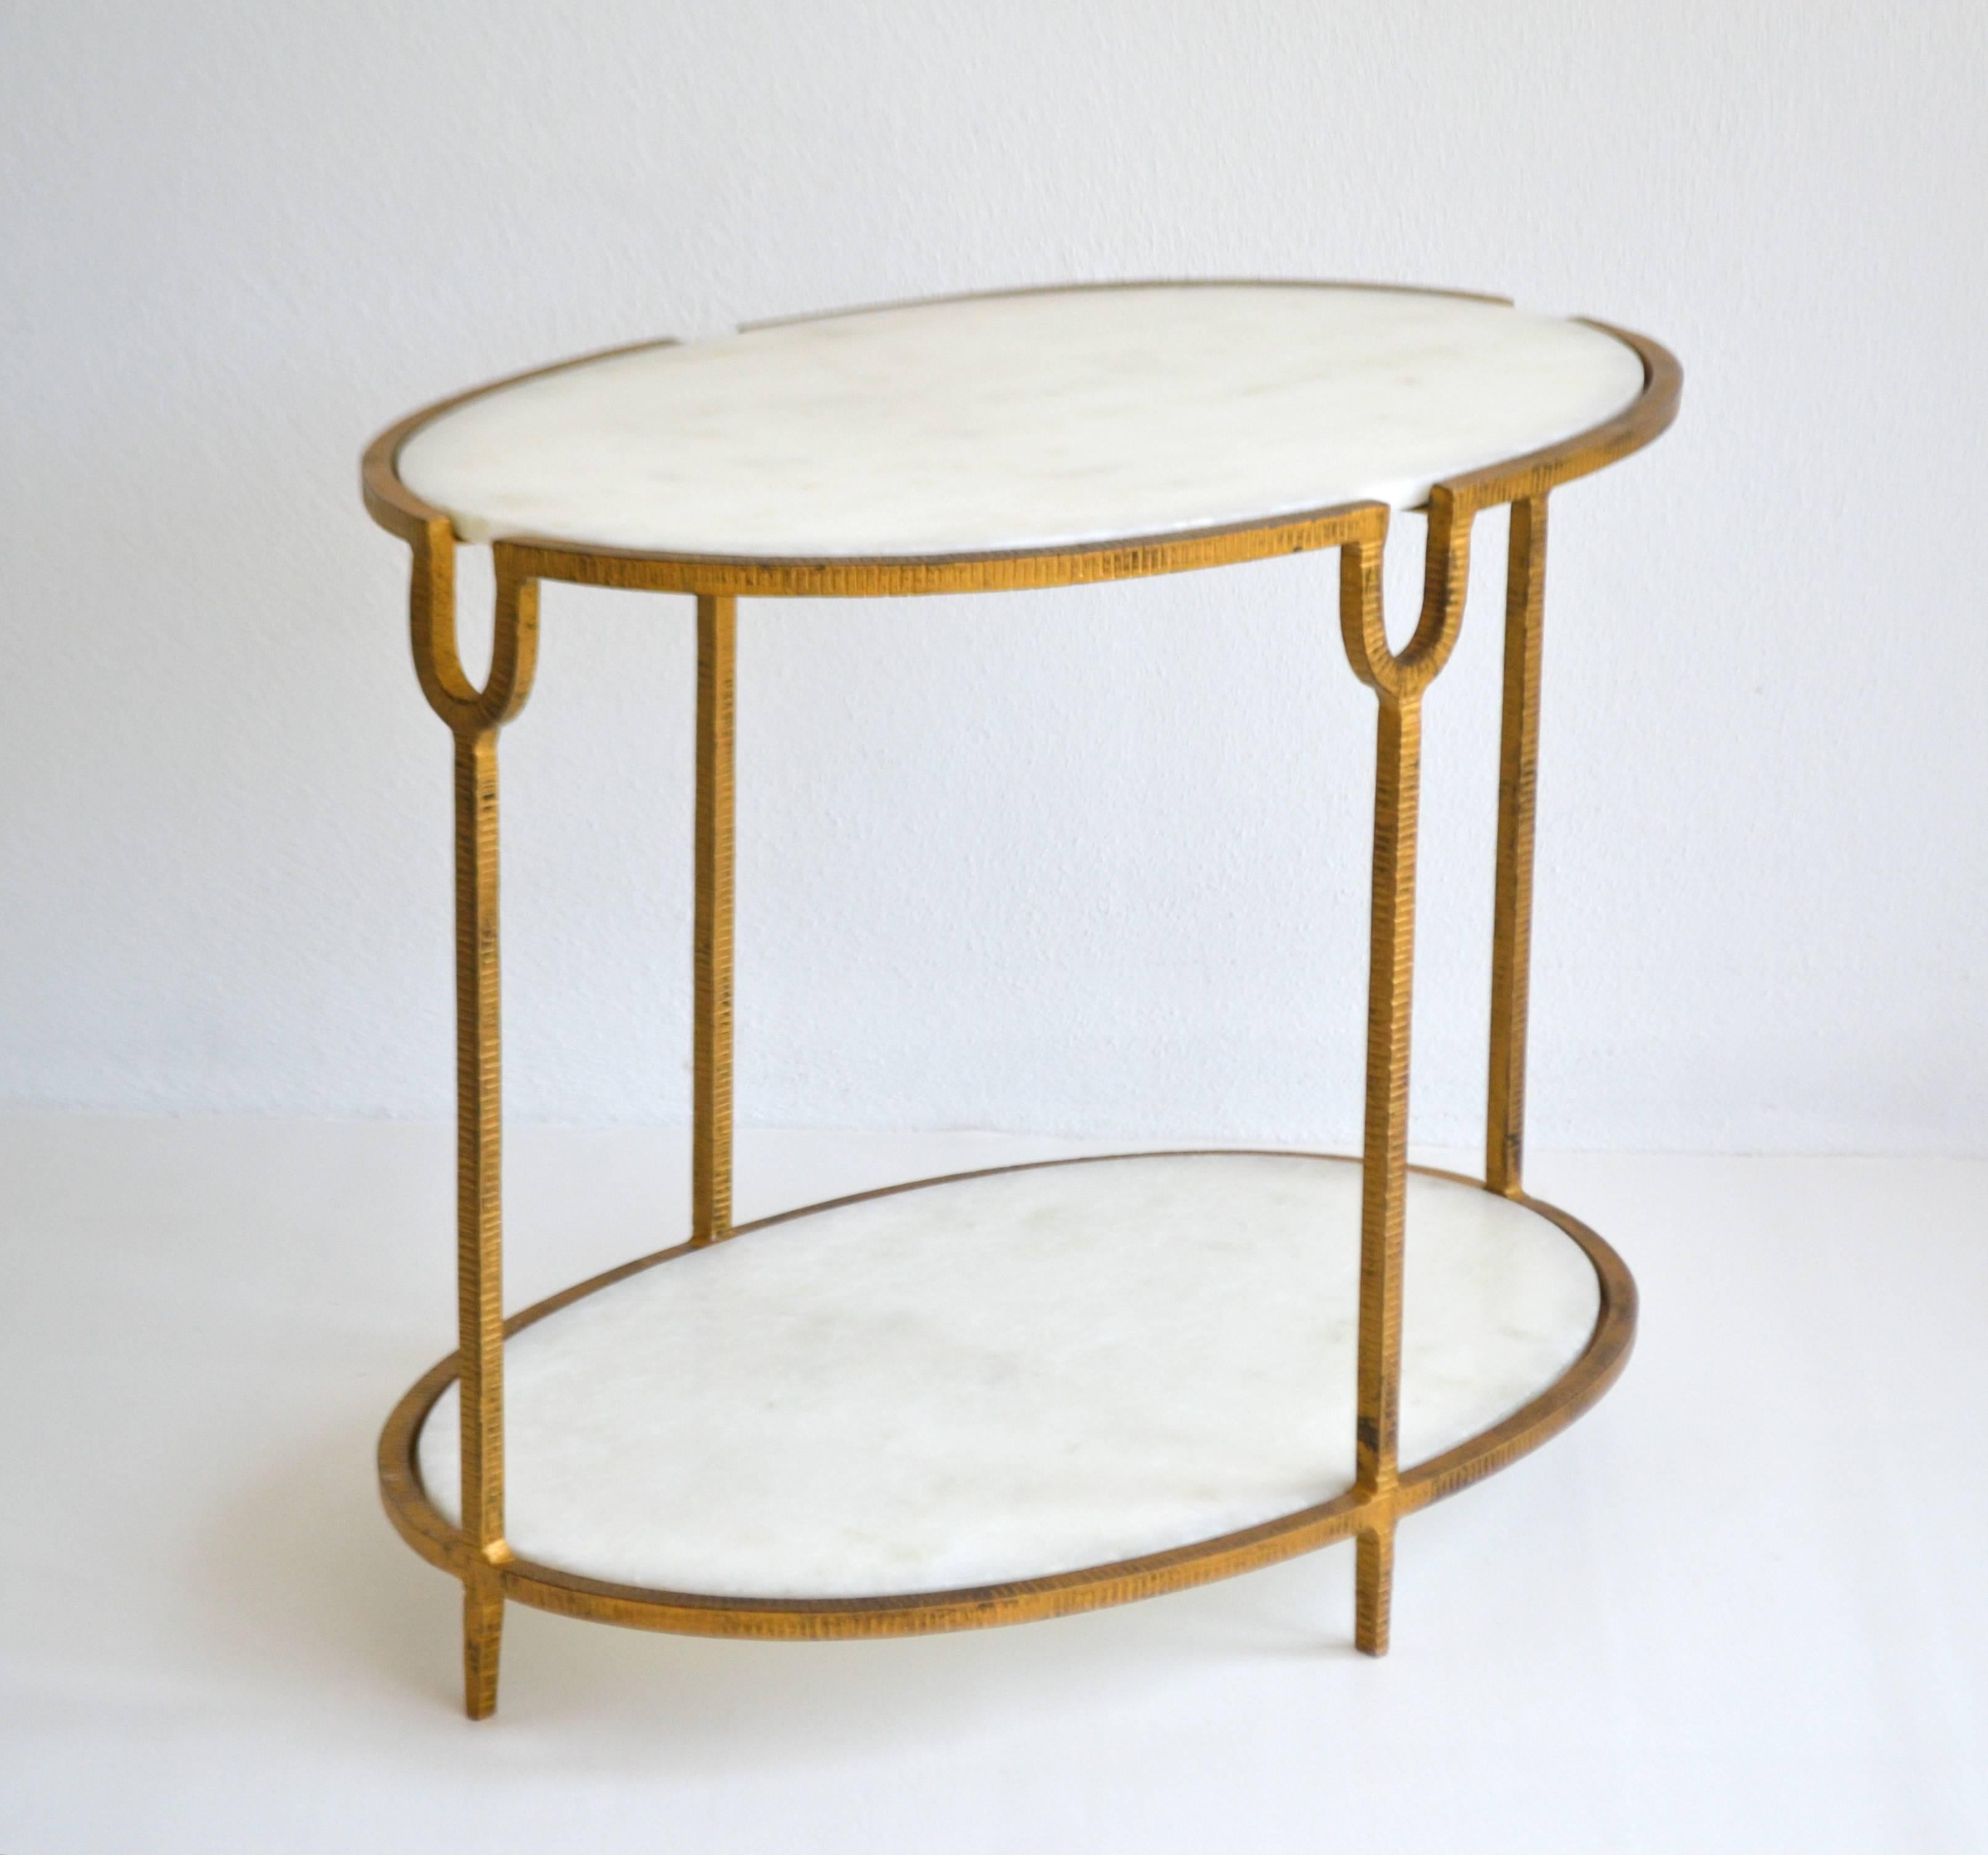 Hollywood Regency Gilt Metal Side Table In Excellent Condition For Sale In West Palm Beach, FL